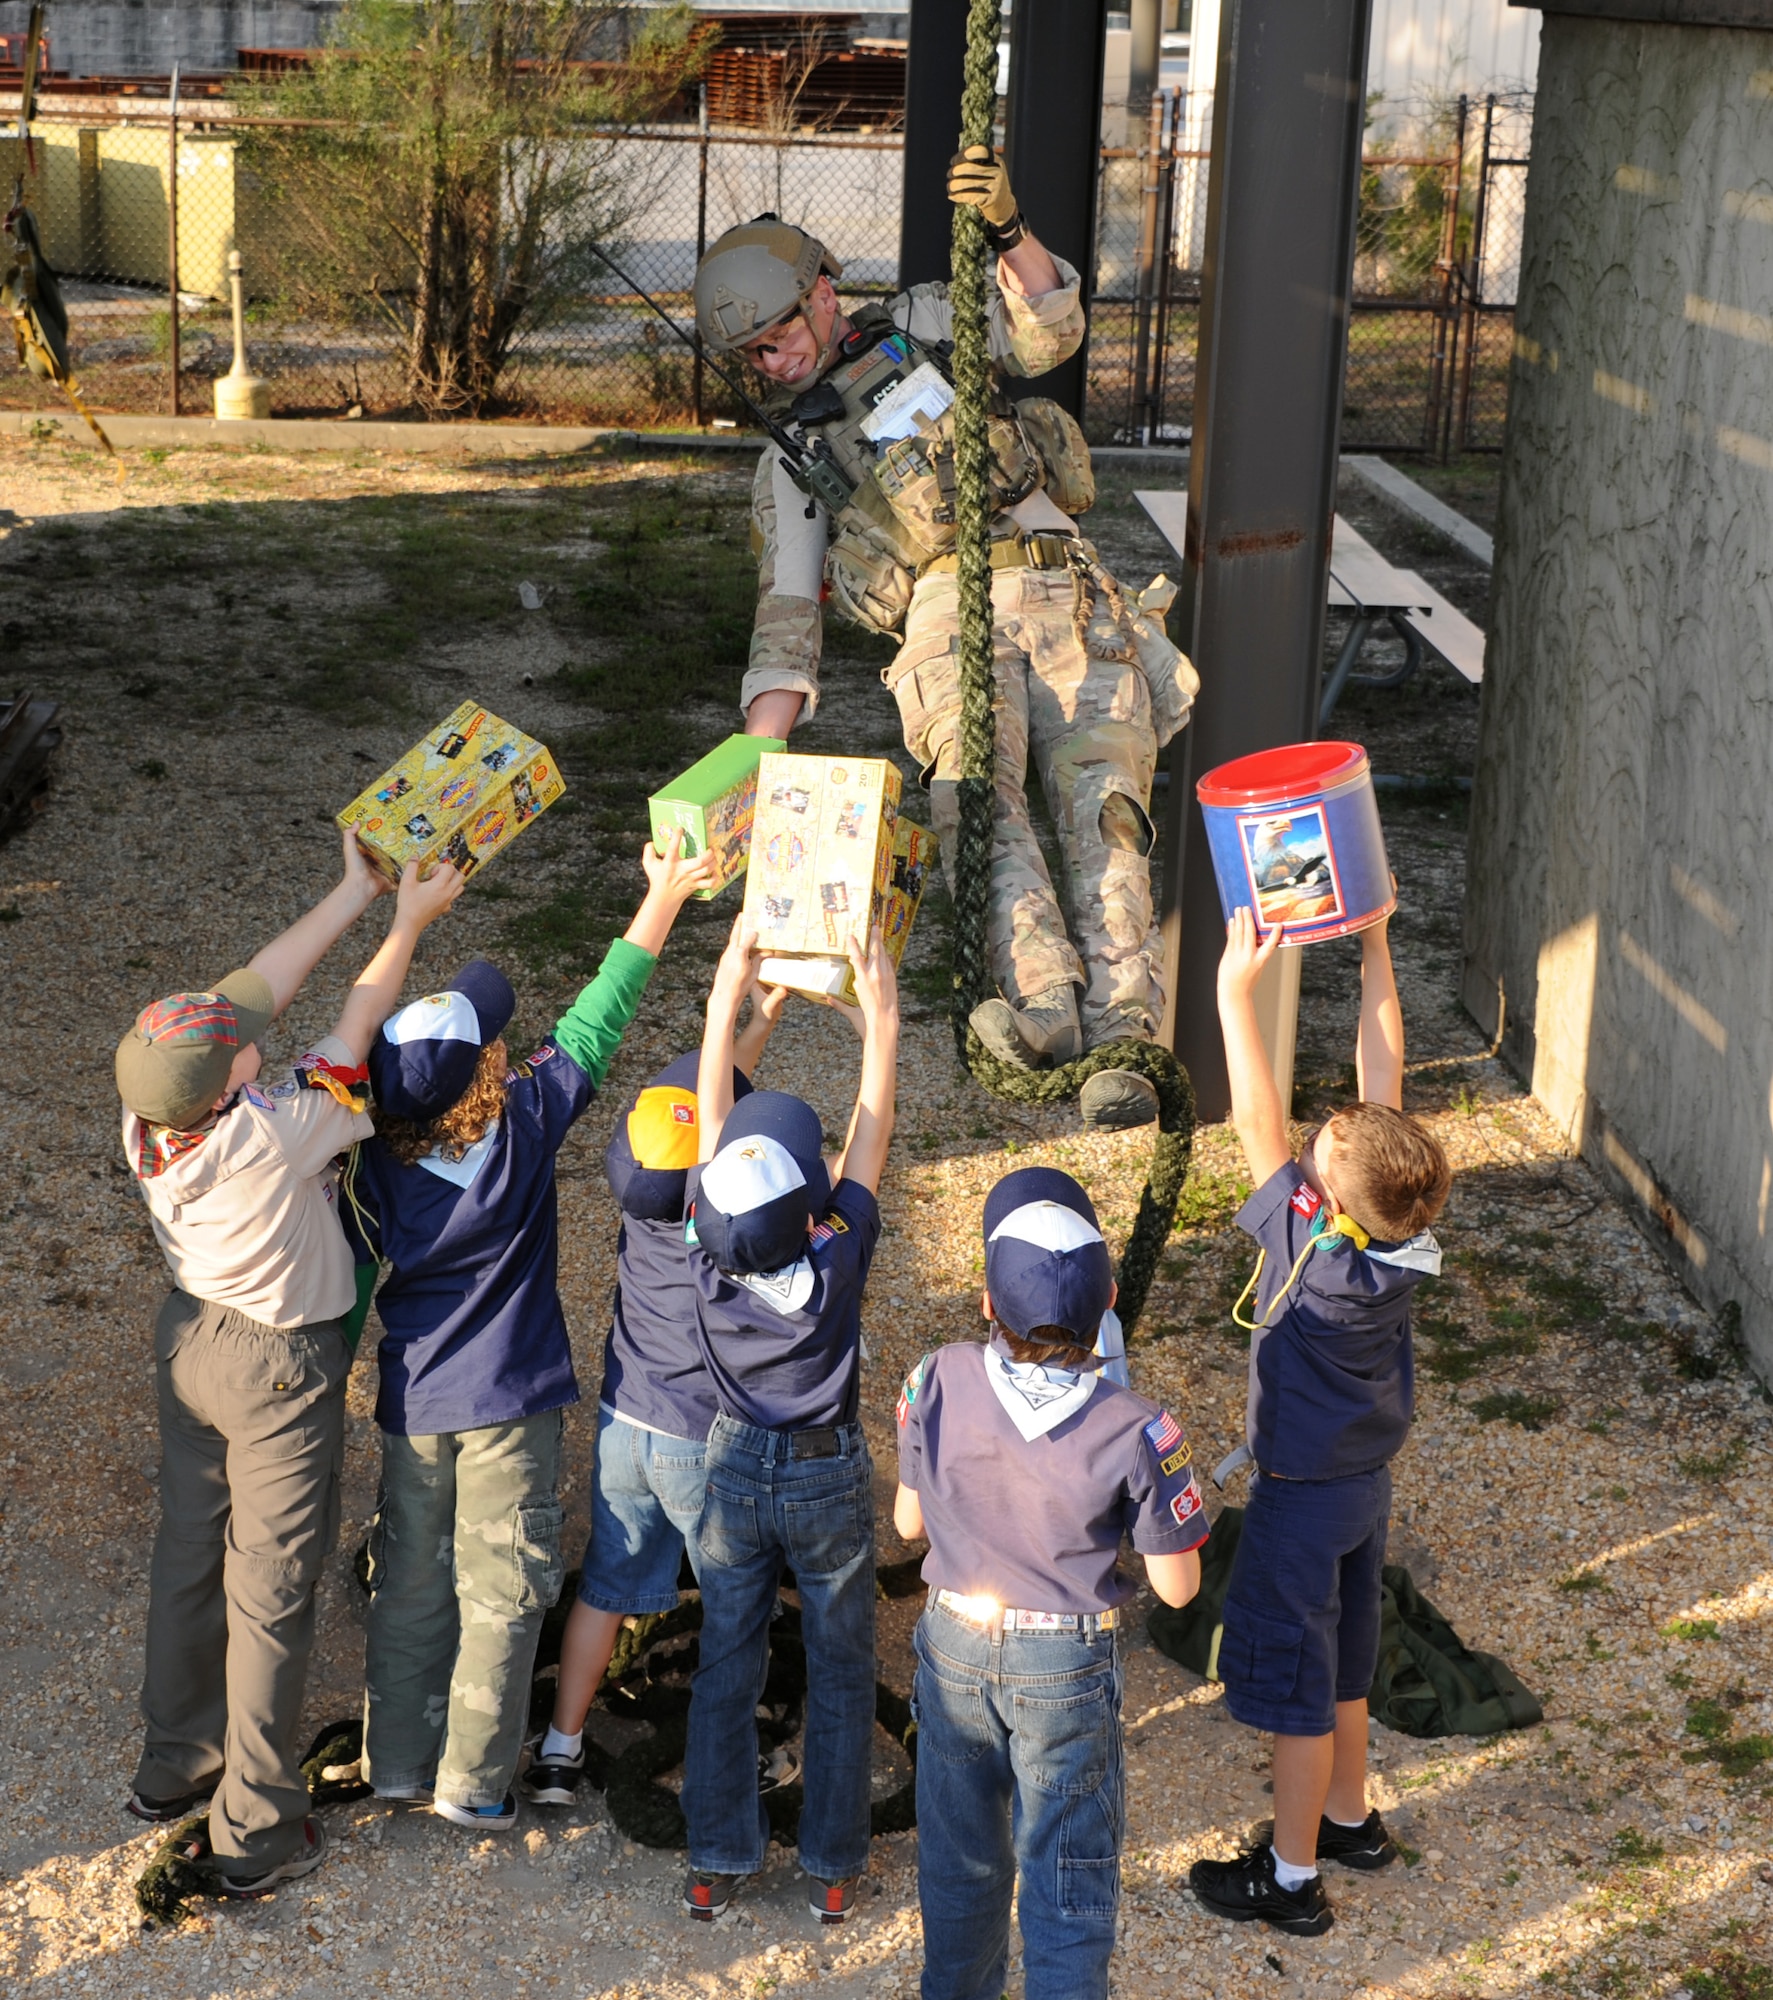 Boy Scouts from Cub Scout Pack 104 of Navarre, Fla., pass popcorn to a combat controller during their visit to the 23rd Special Tactics Squadron at Hurlburt Field, Fla., Jan. 24, 2013. Six Boy Scouts of America donated $760 worth of popcorn to Airmen on behalf of Pack 104. The Scouts were given the opportunity to explore a Humvee and witness combat controls rappel as a token of appreciation. (U.S. Air Force photo/Rachel Arroyo)